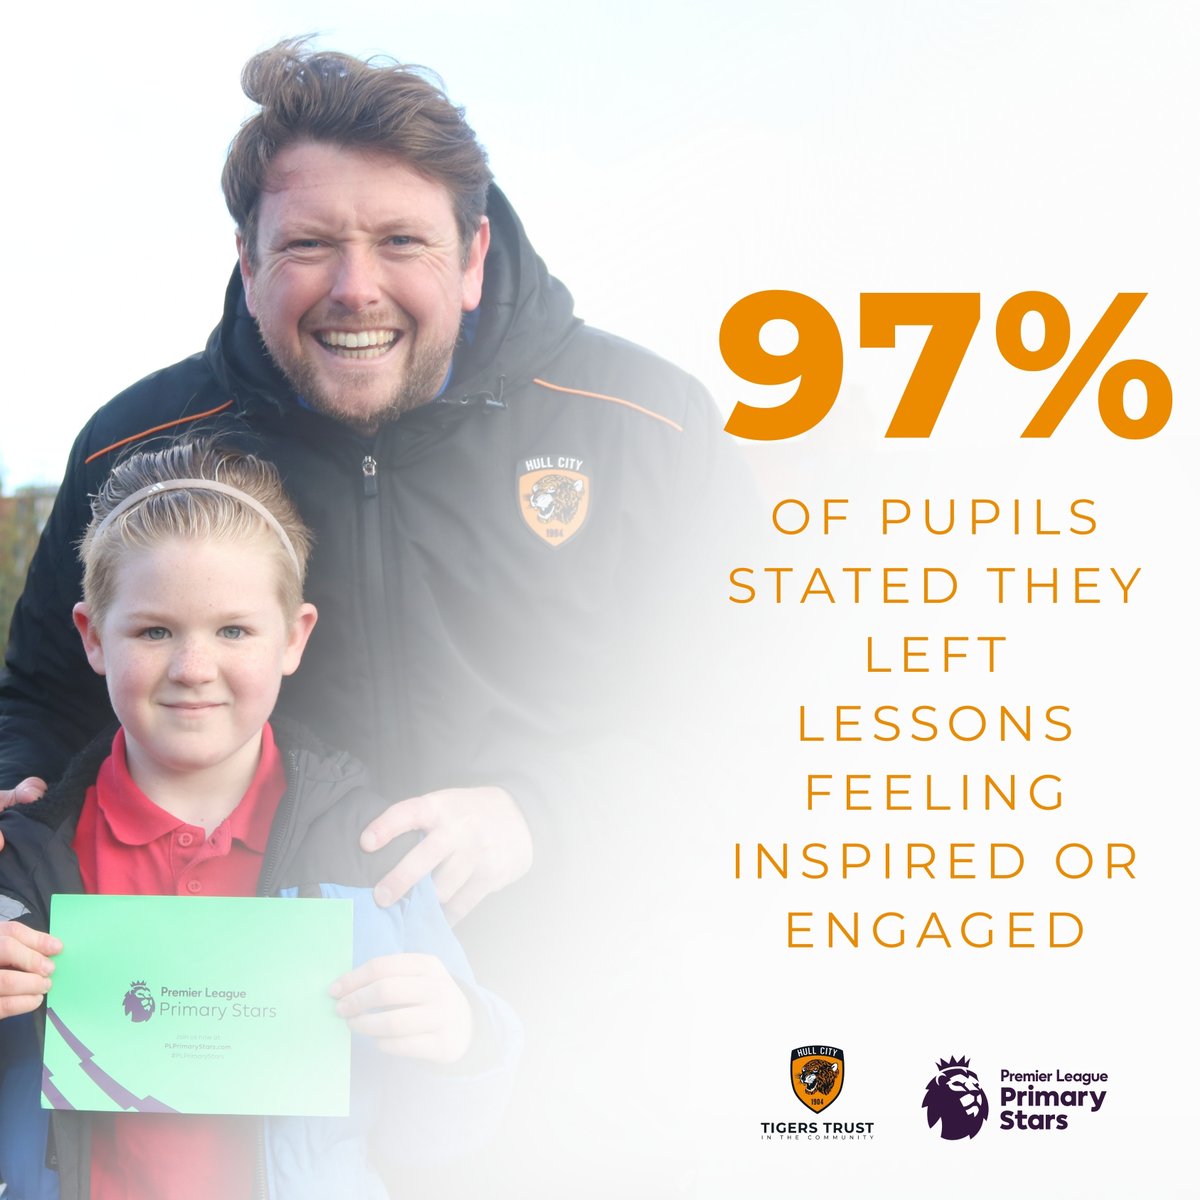 𝗣𝗟 𝗣𝗥𝗜𝗠𝗔𝗥𝗬 𝗦𝗧𝗔𝗥𝗦 ⭐ In the last 2 years, our #PLPrimaryStars programme has supported 60+ schools, whilst enhancing the health, well being & aspirations of local children, including 97% who reported feeling inspired or engaged after PE. 📹 shorturl.at/euAHR